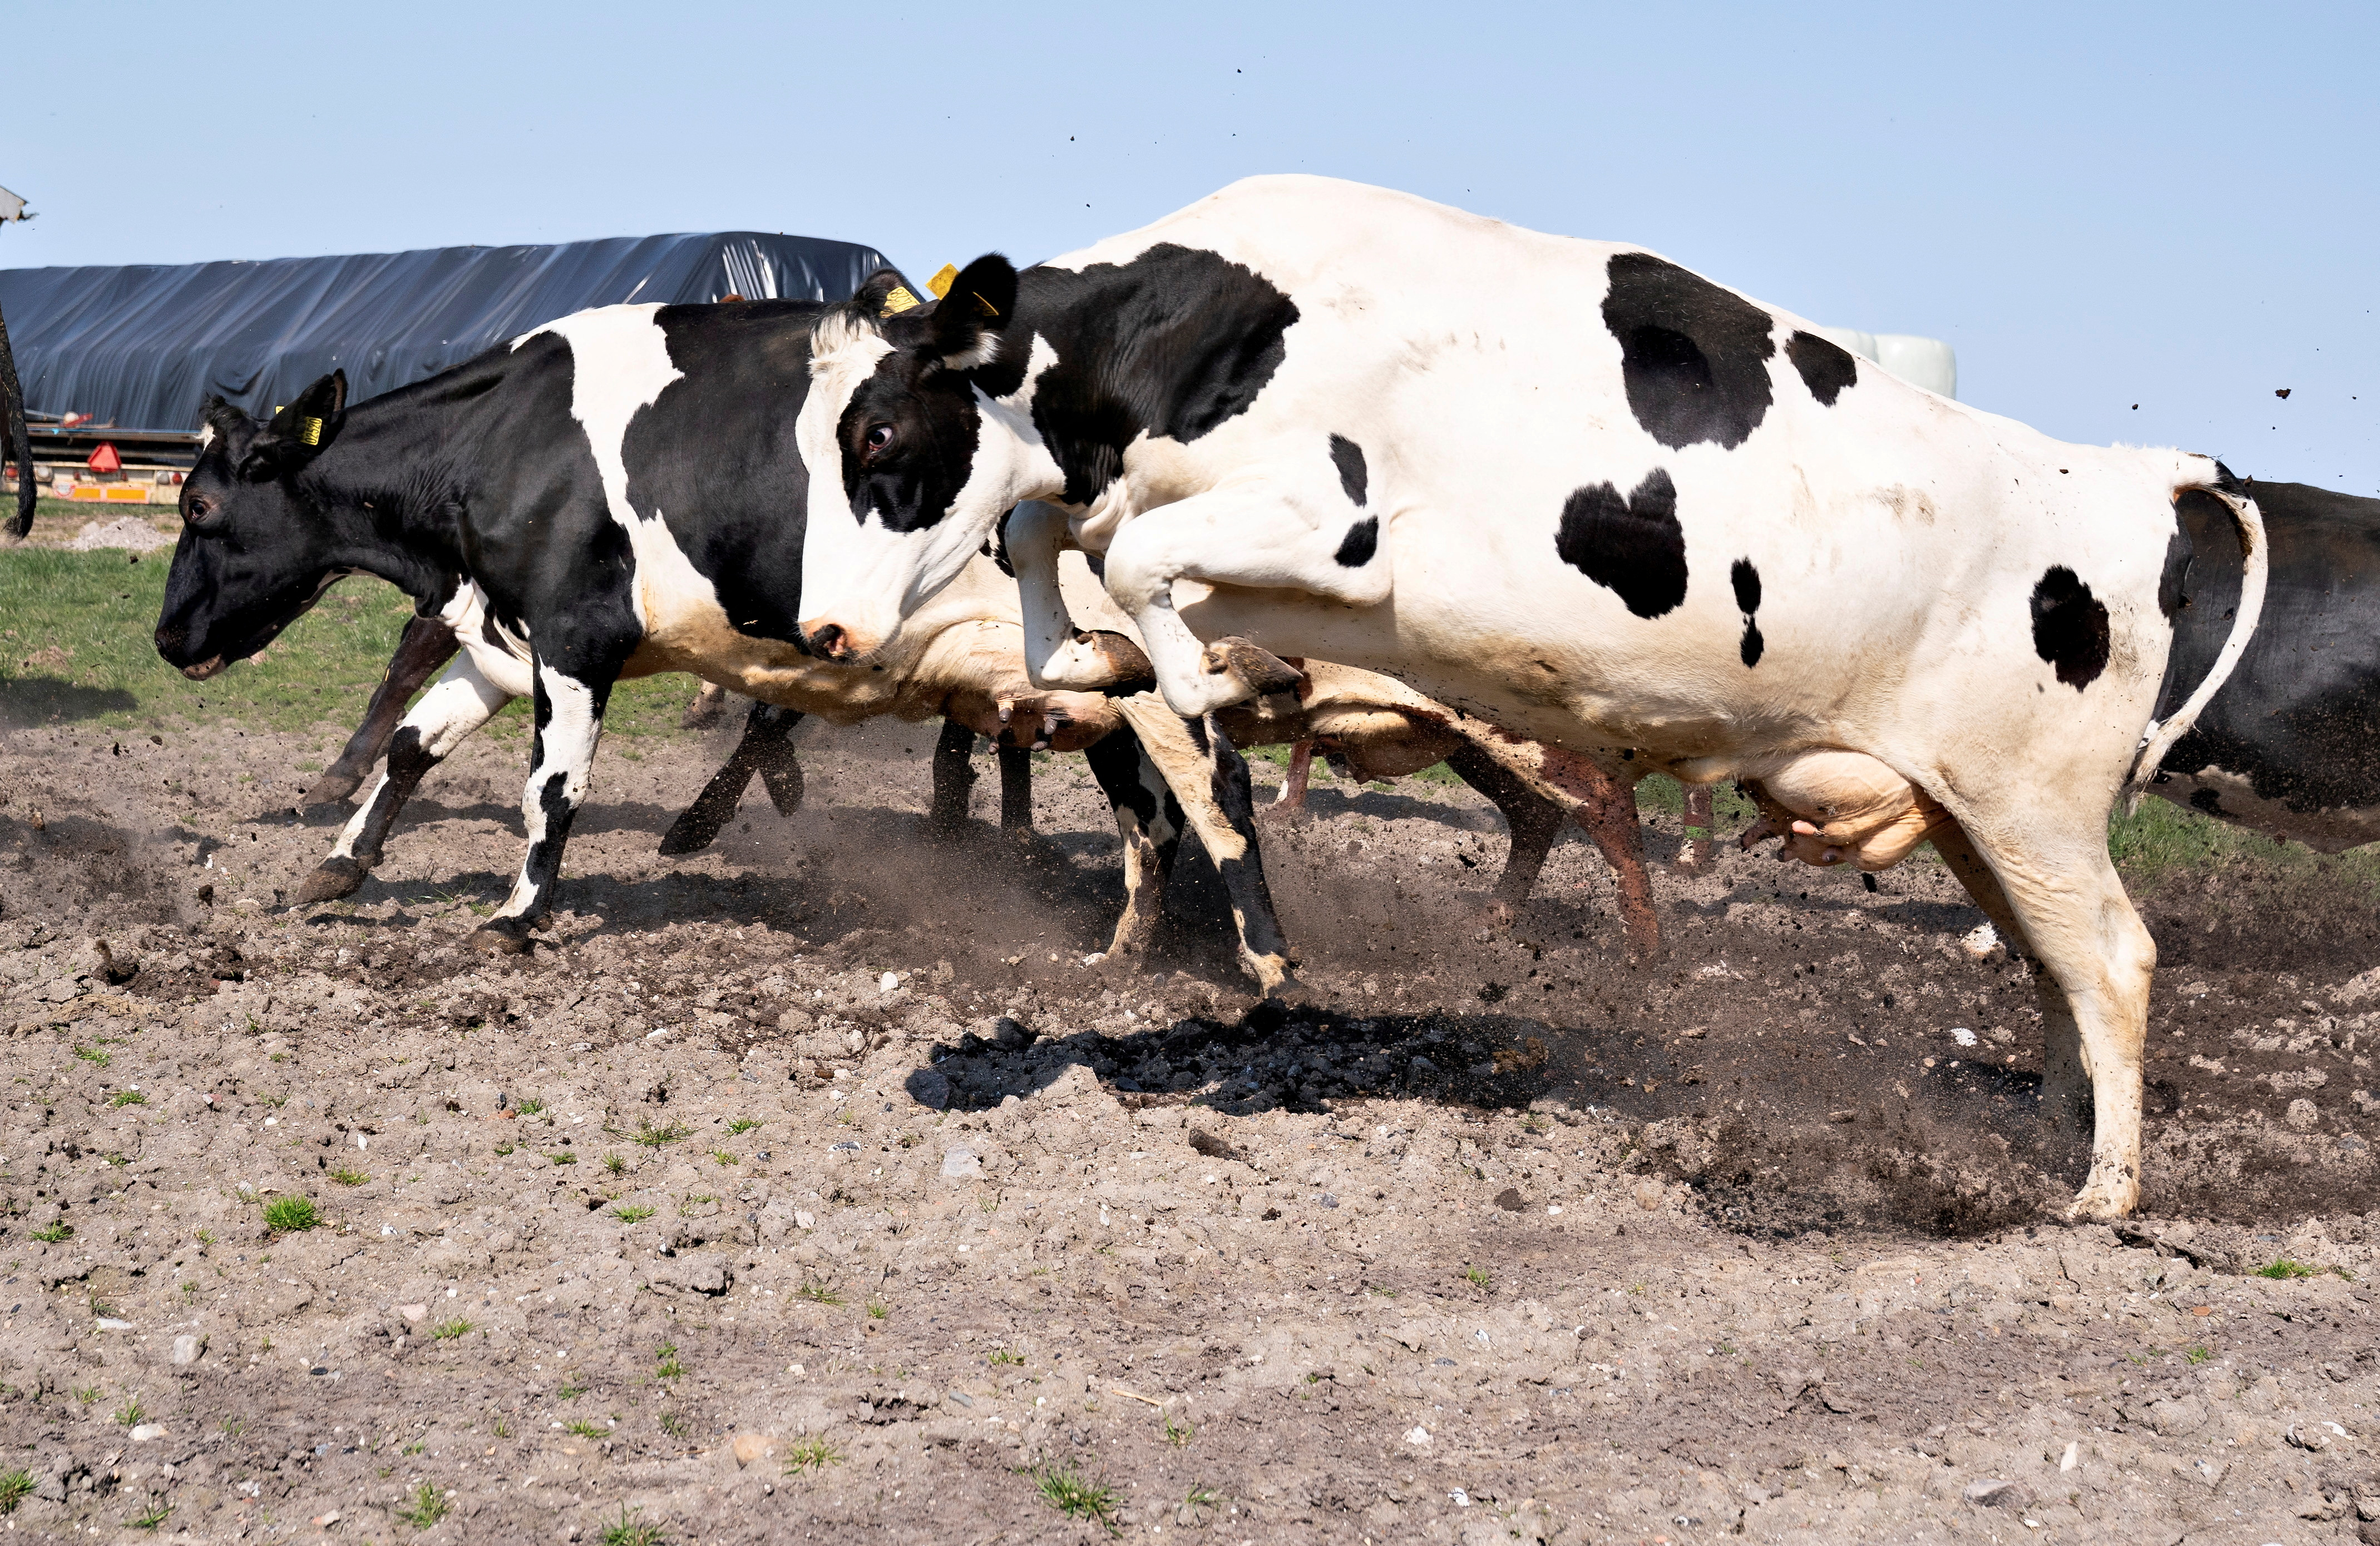 Organic cows are seen released to graze after the winter in Tjele